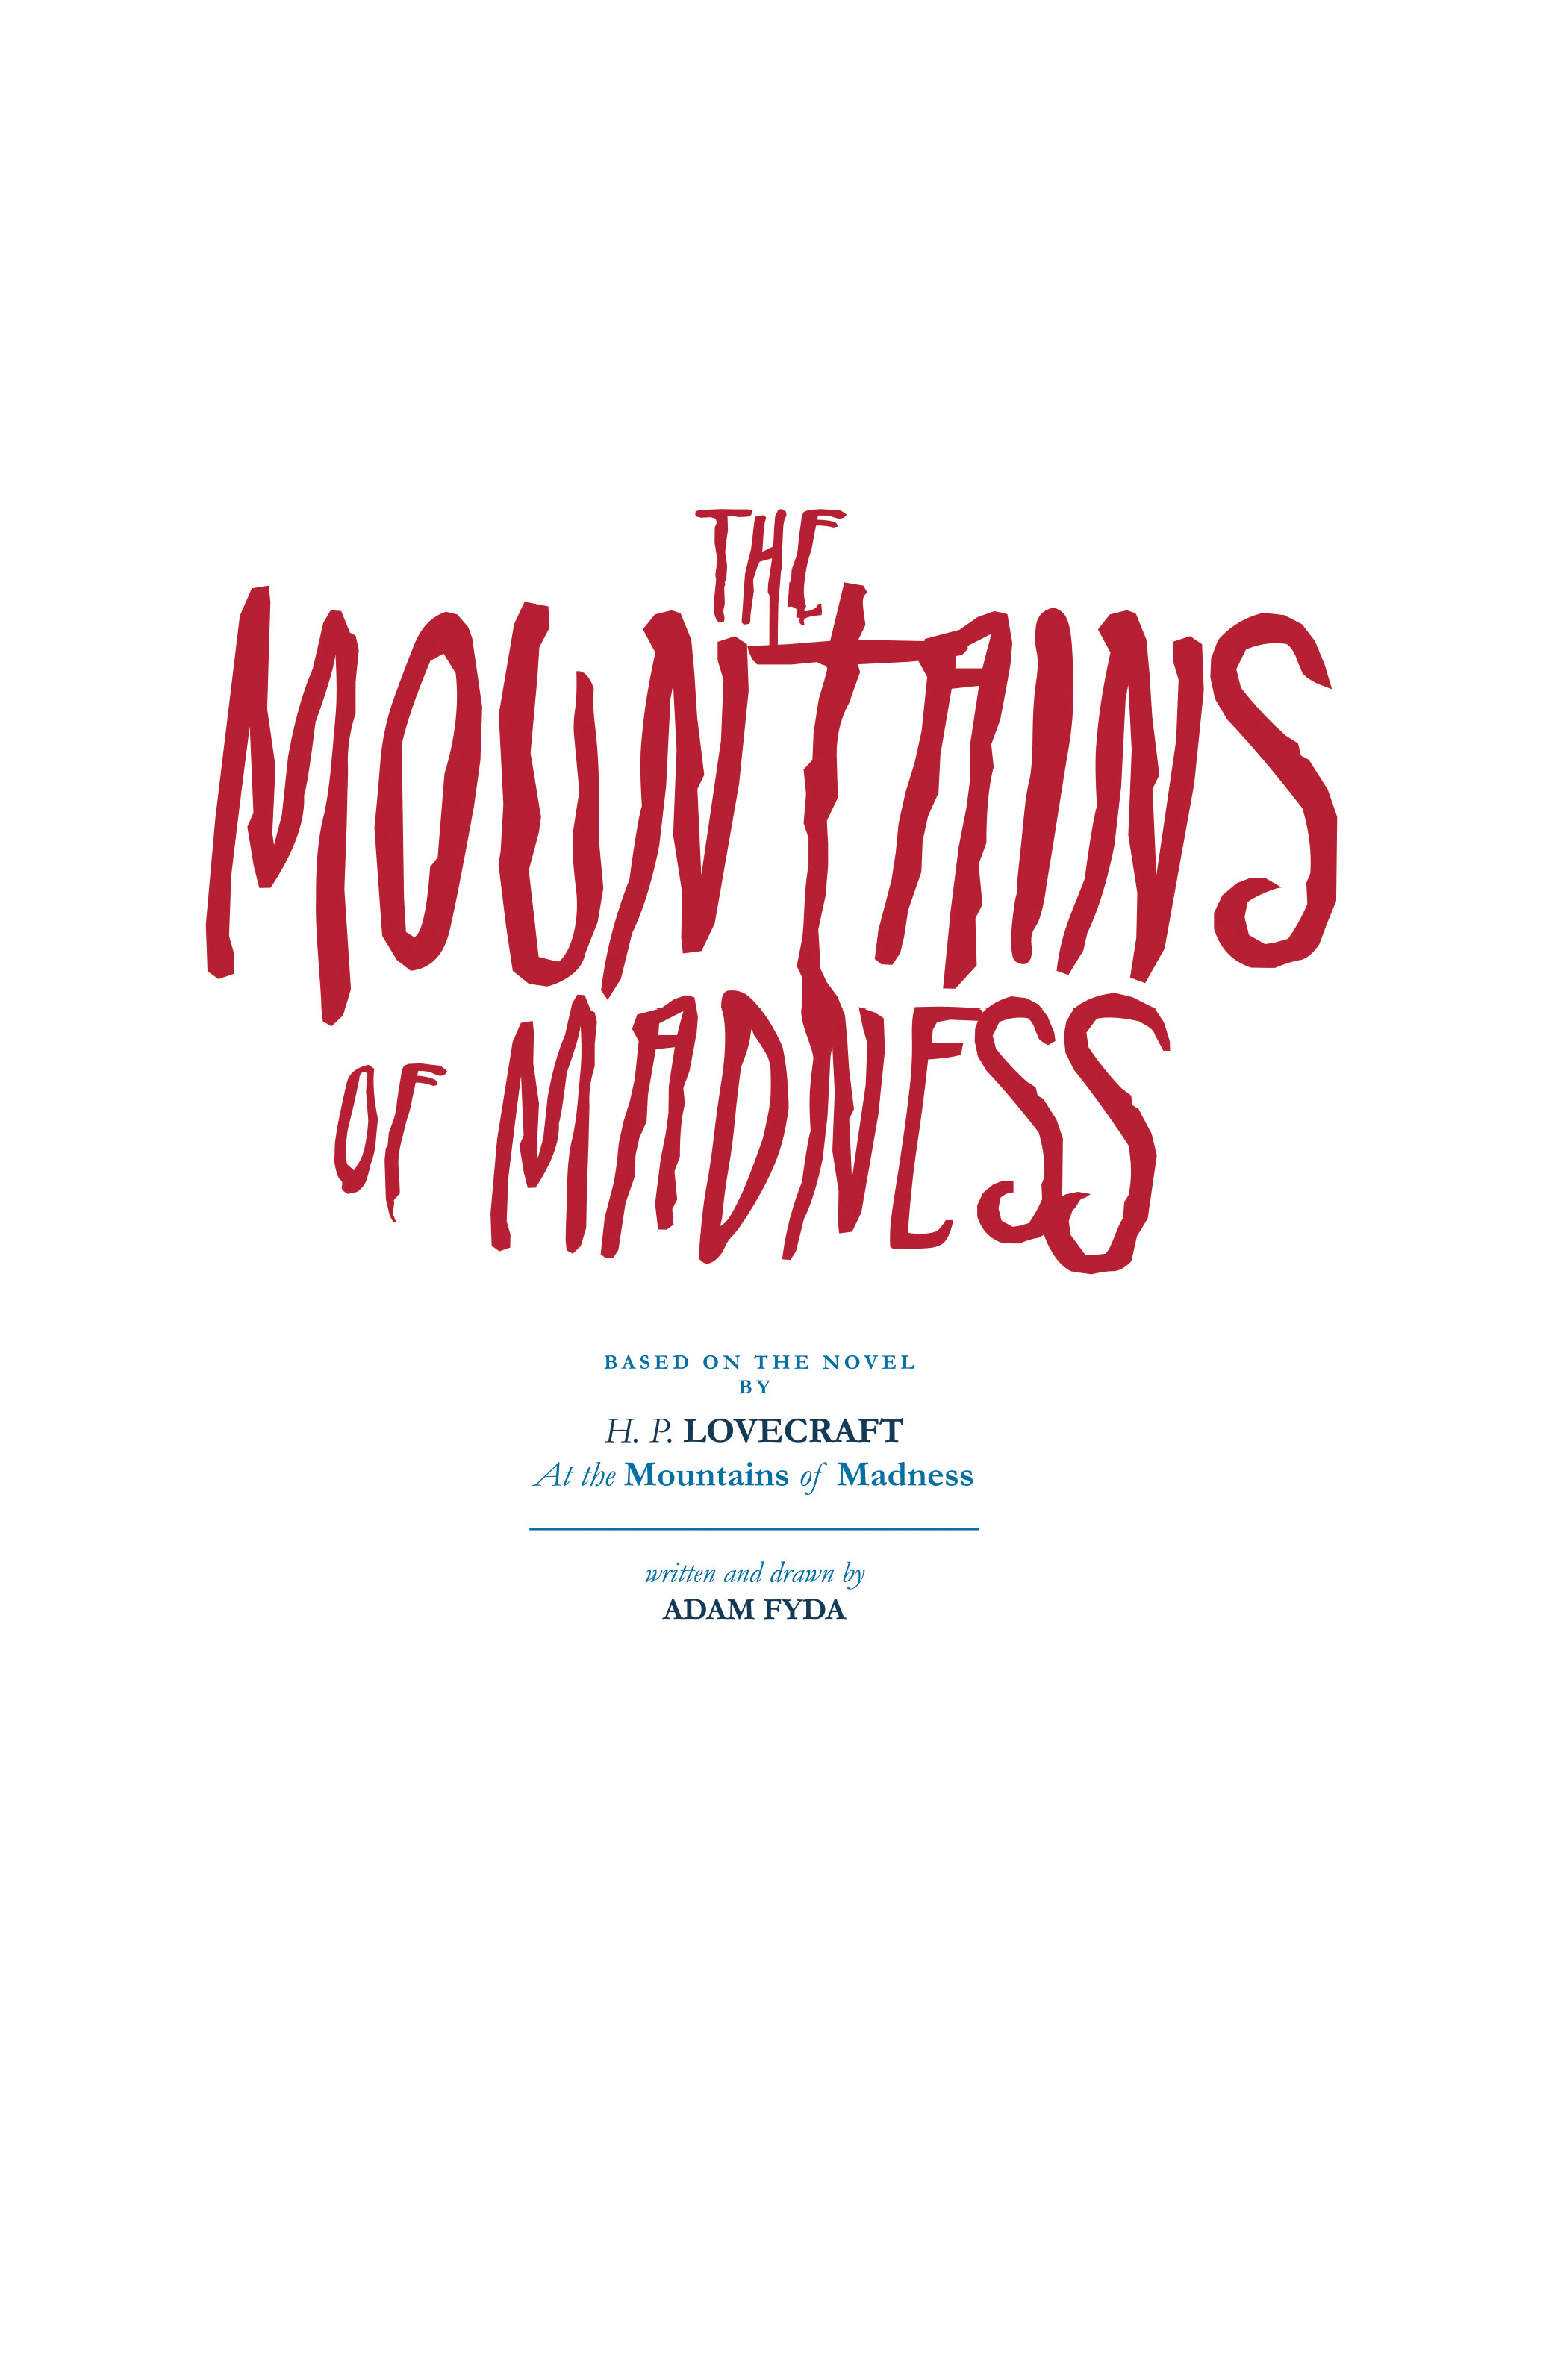 Read online The Mountains of Madness comic -  Issue # TPB - 2